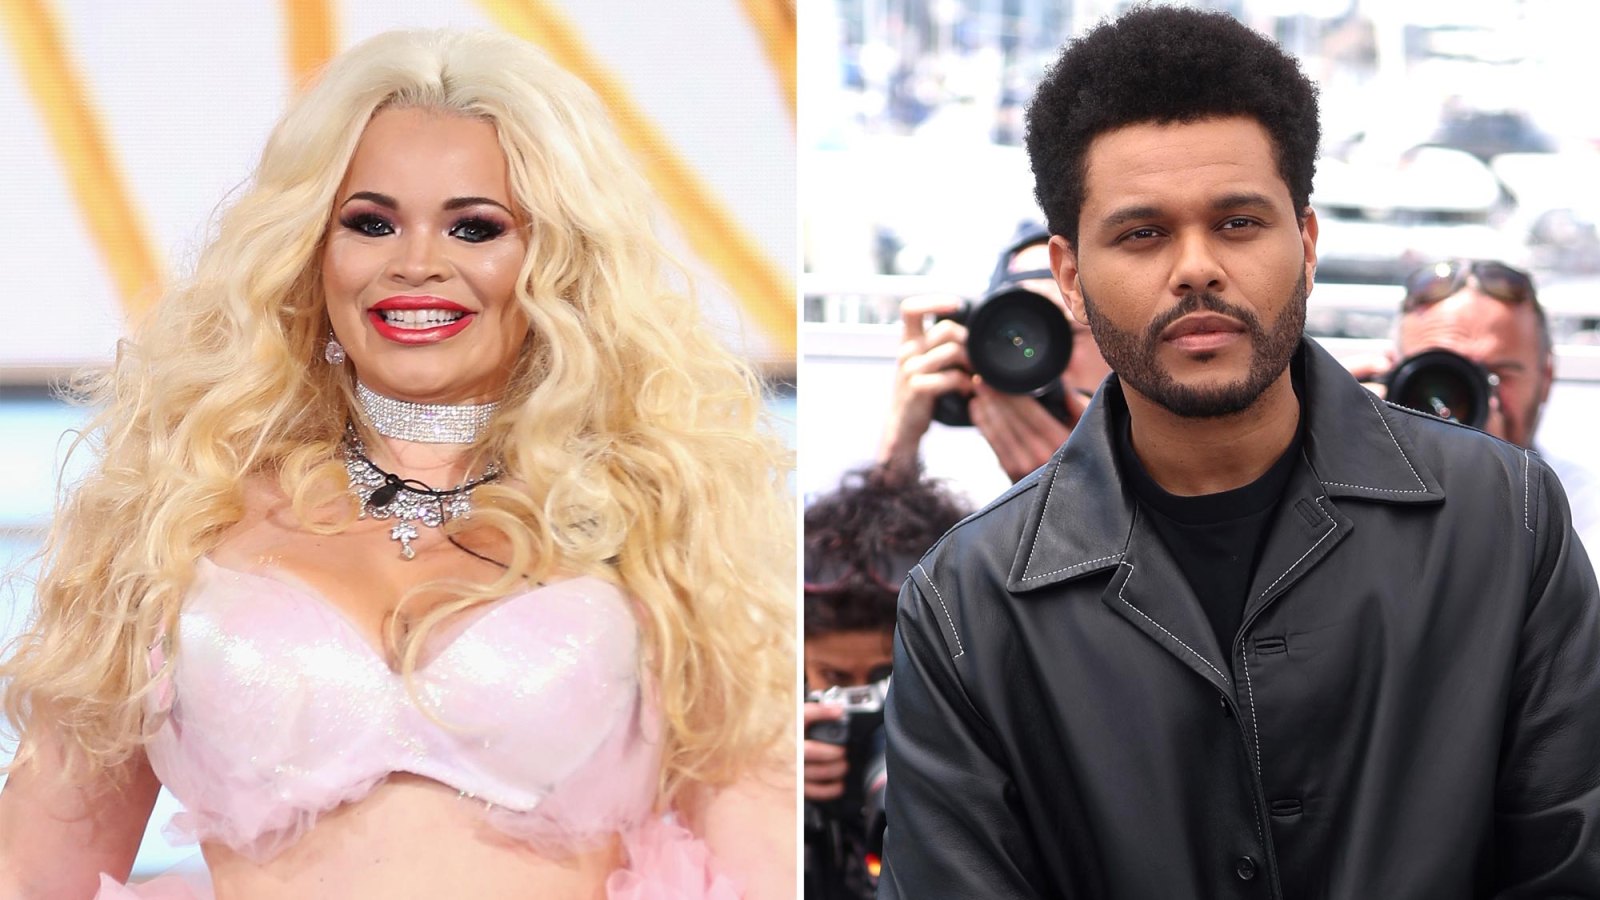 Internet Star Trisha Paytas Says The Weeknd Slid Into her DMs